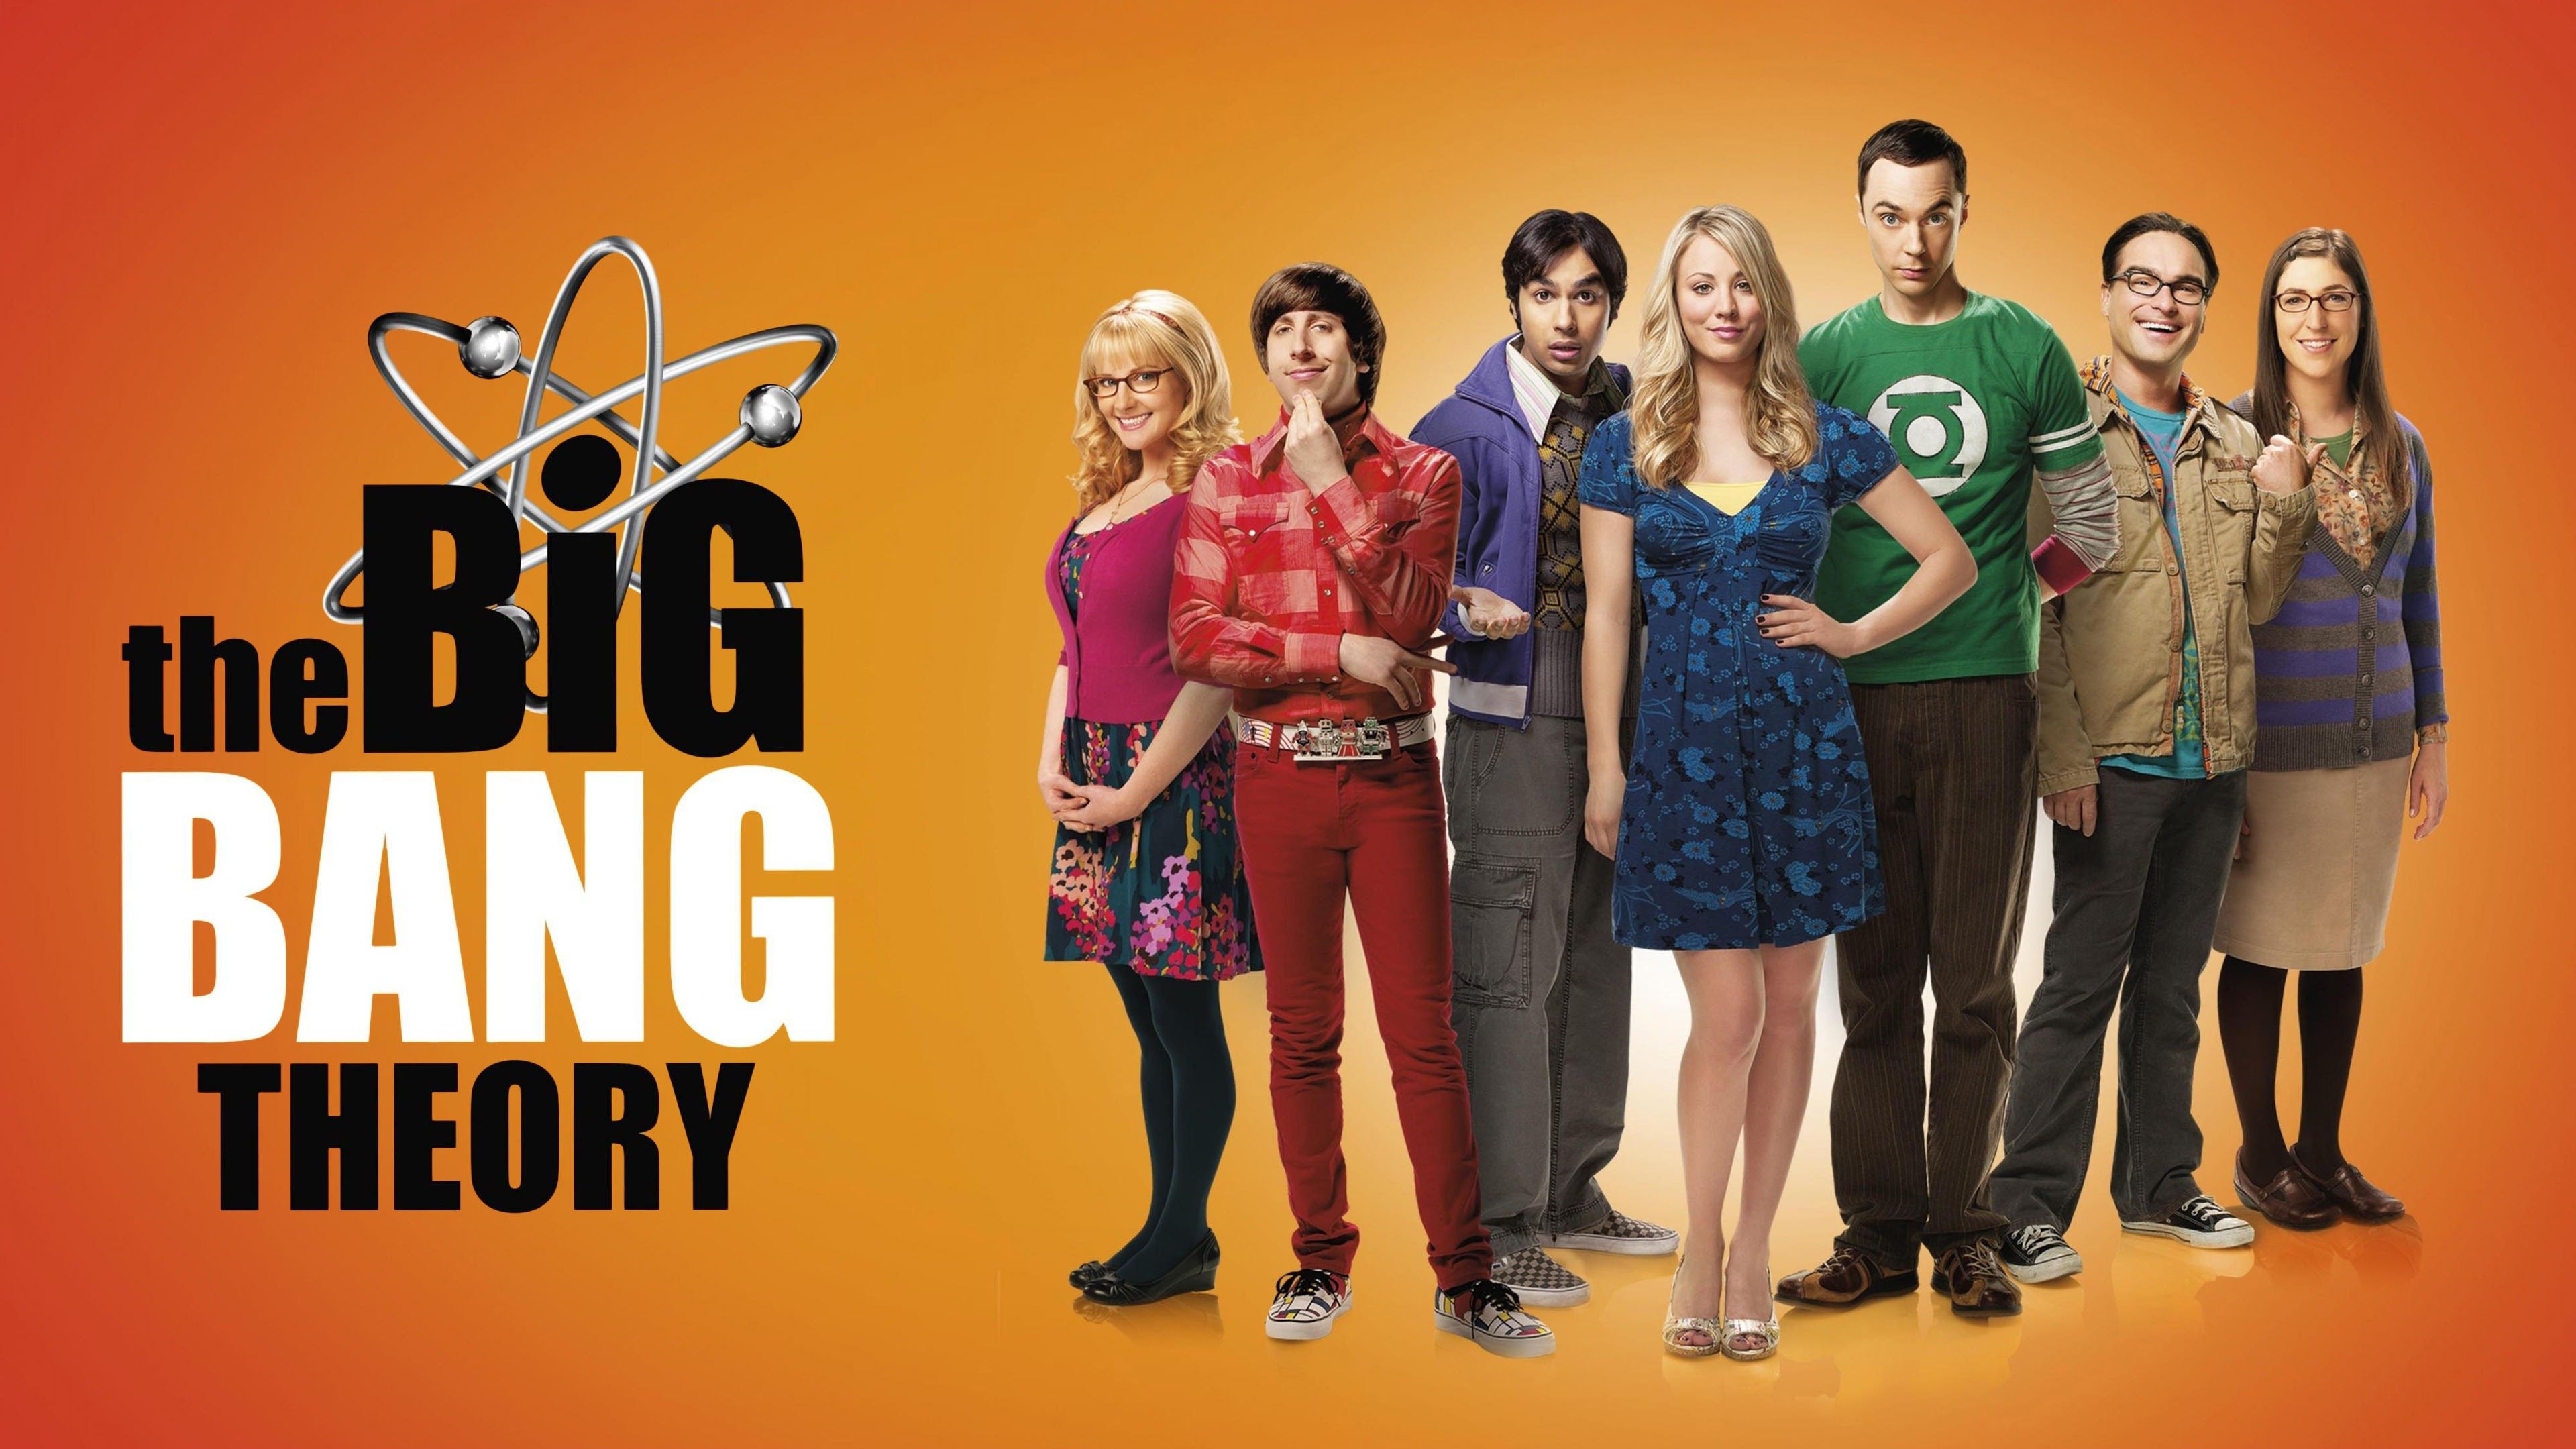 THE BIG BANG THEORY TV SERIES FULL MAIN CAST COVER ART ORANGE  PUBLICITY PHOTO 